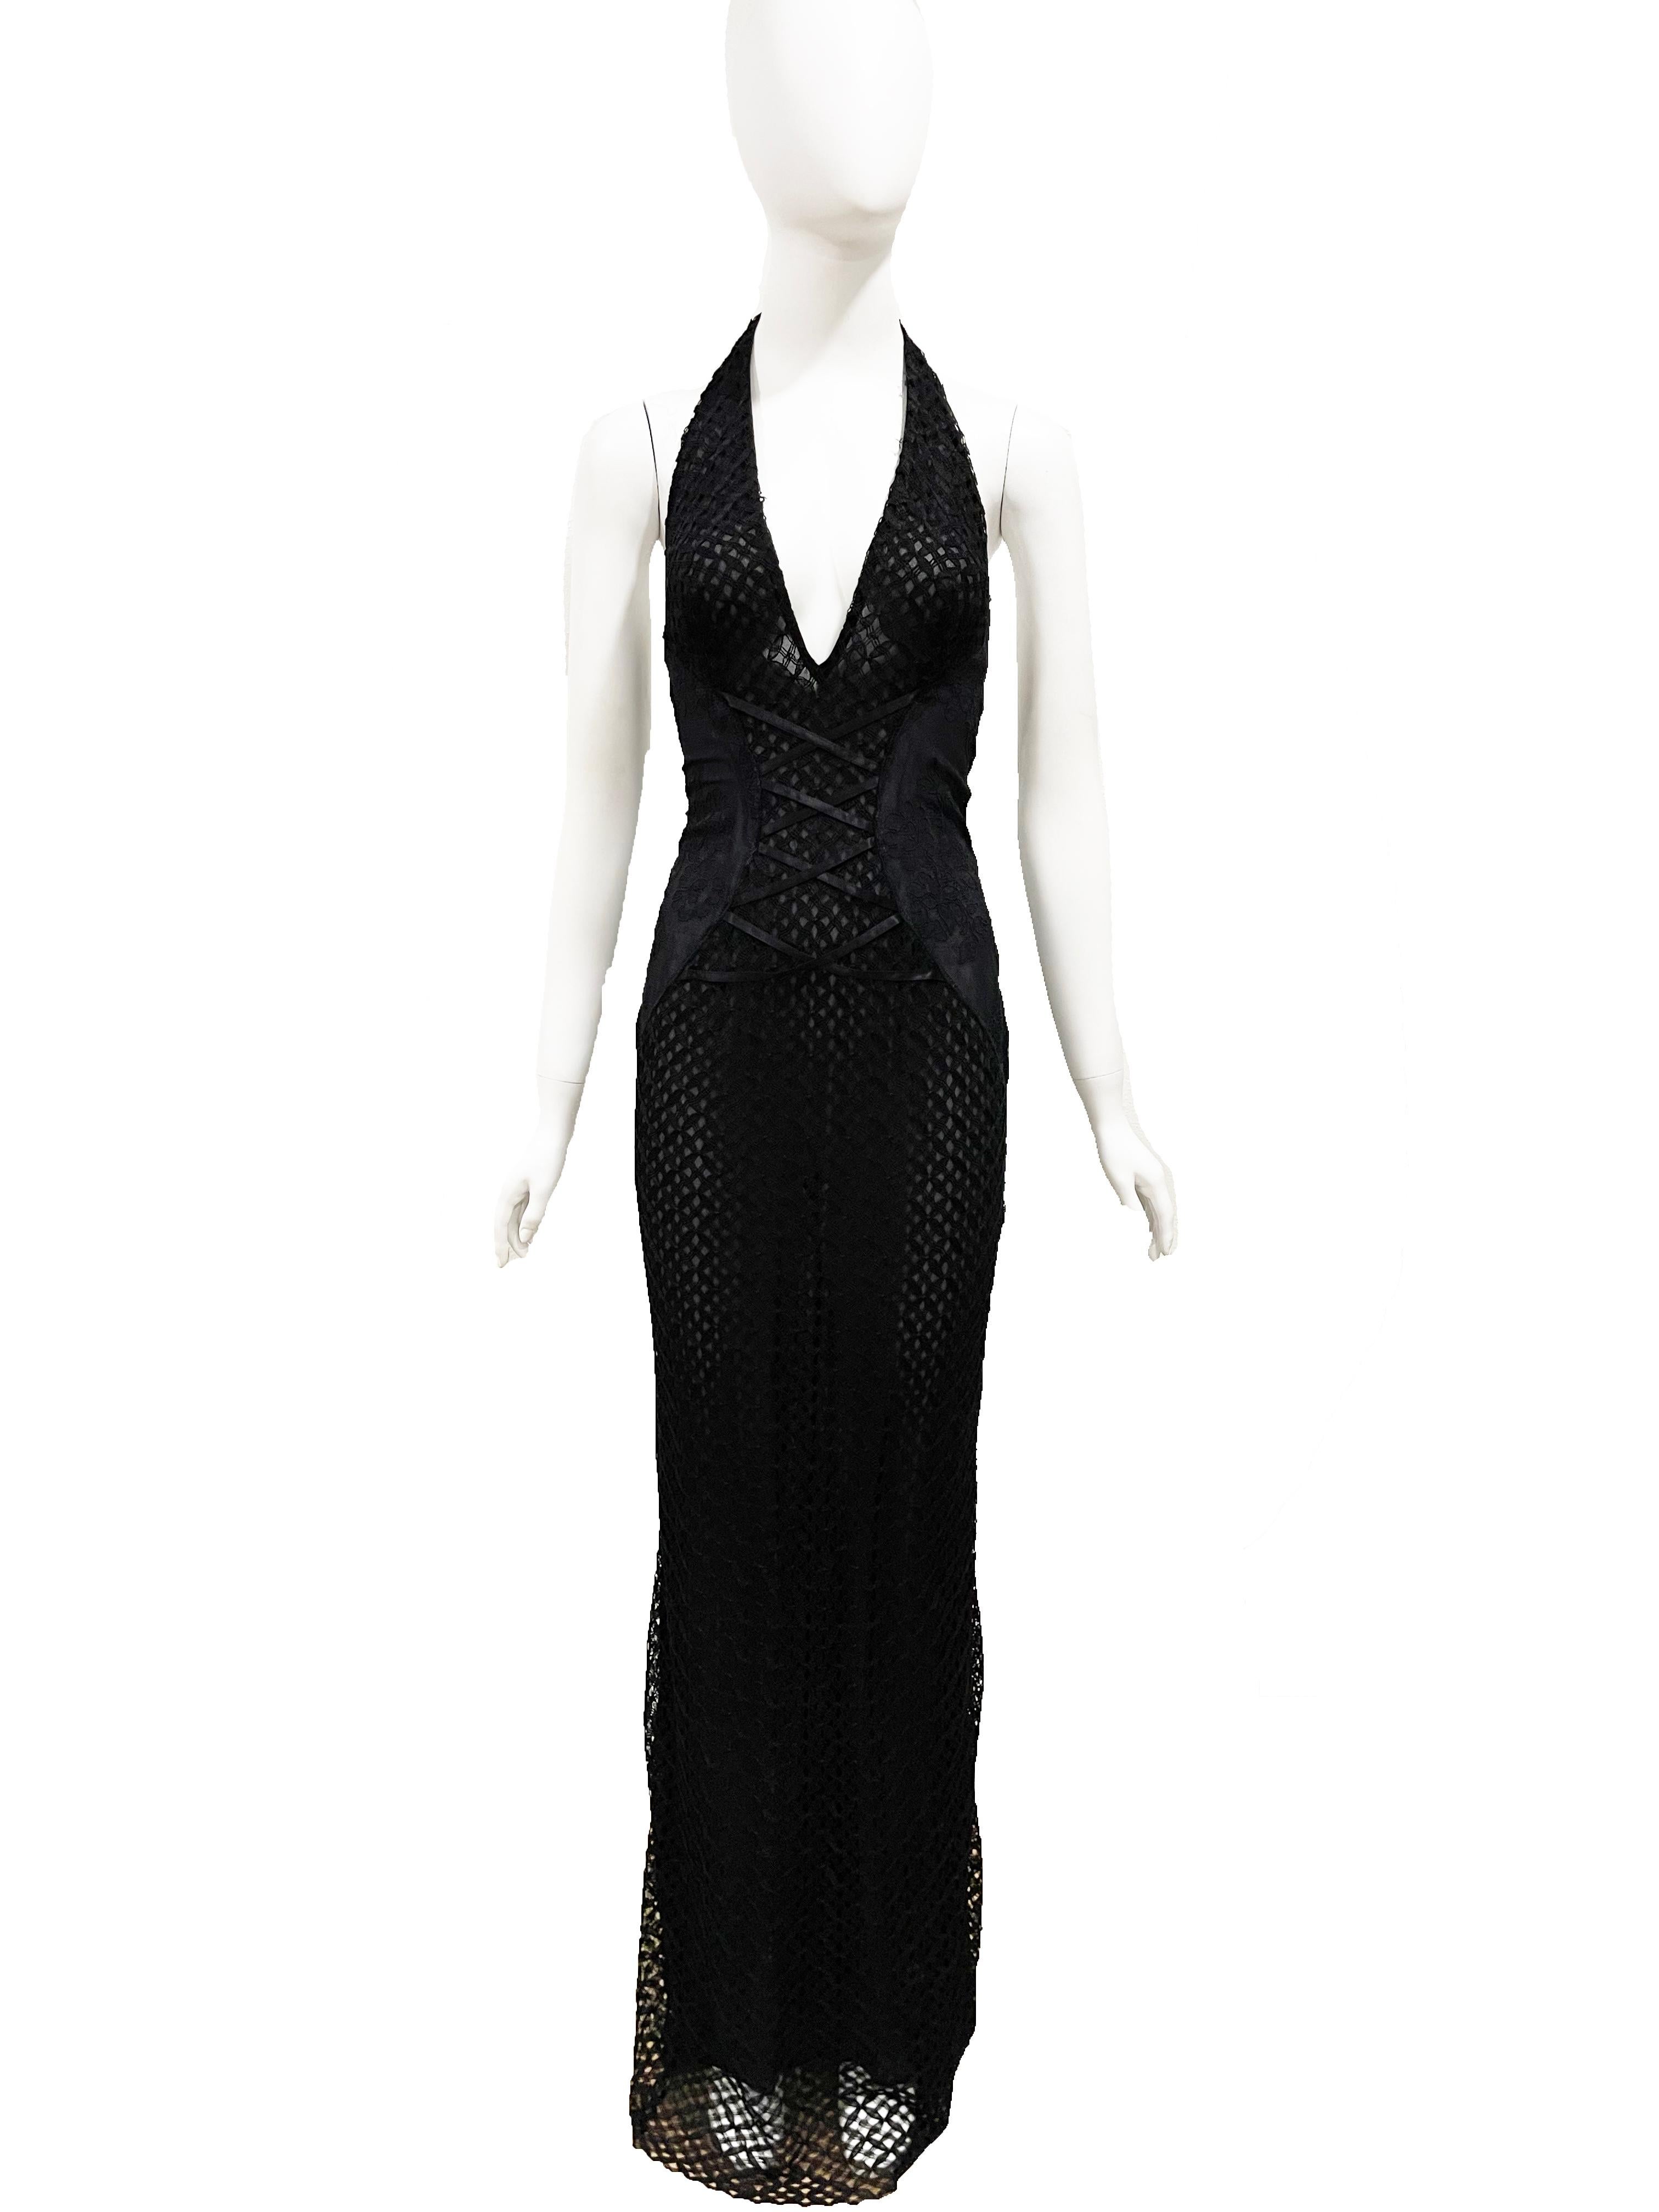 2002 S/S GIANNI VERSACE Semi Sheer Black Halter Gown

Cotton & Silk fabric
Condition: Very good
Made in Italy
sz S 